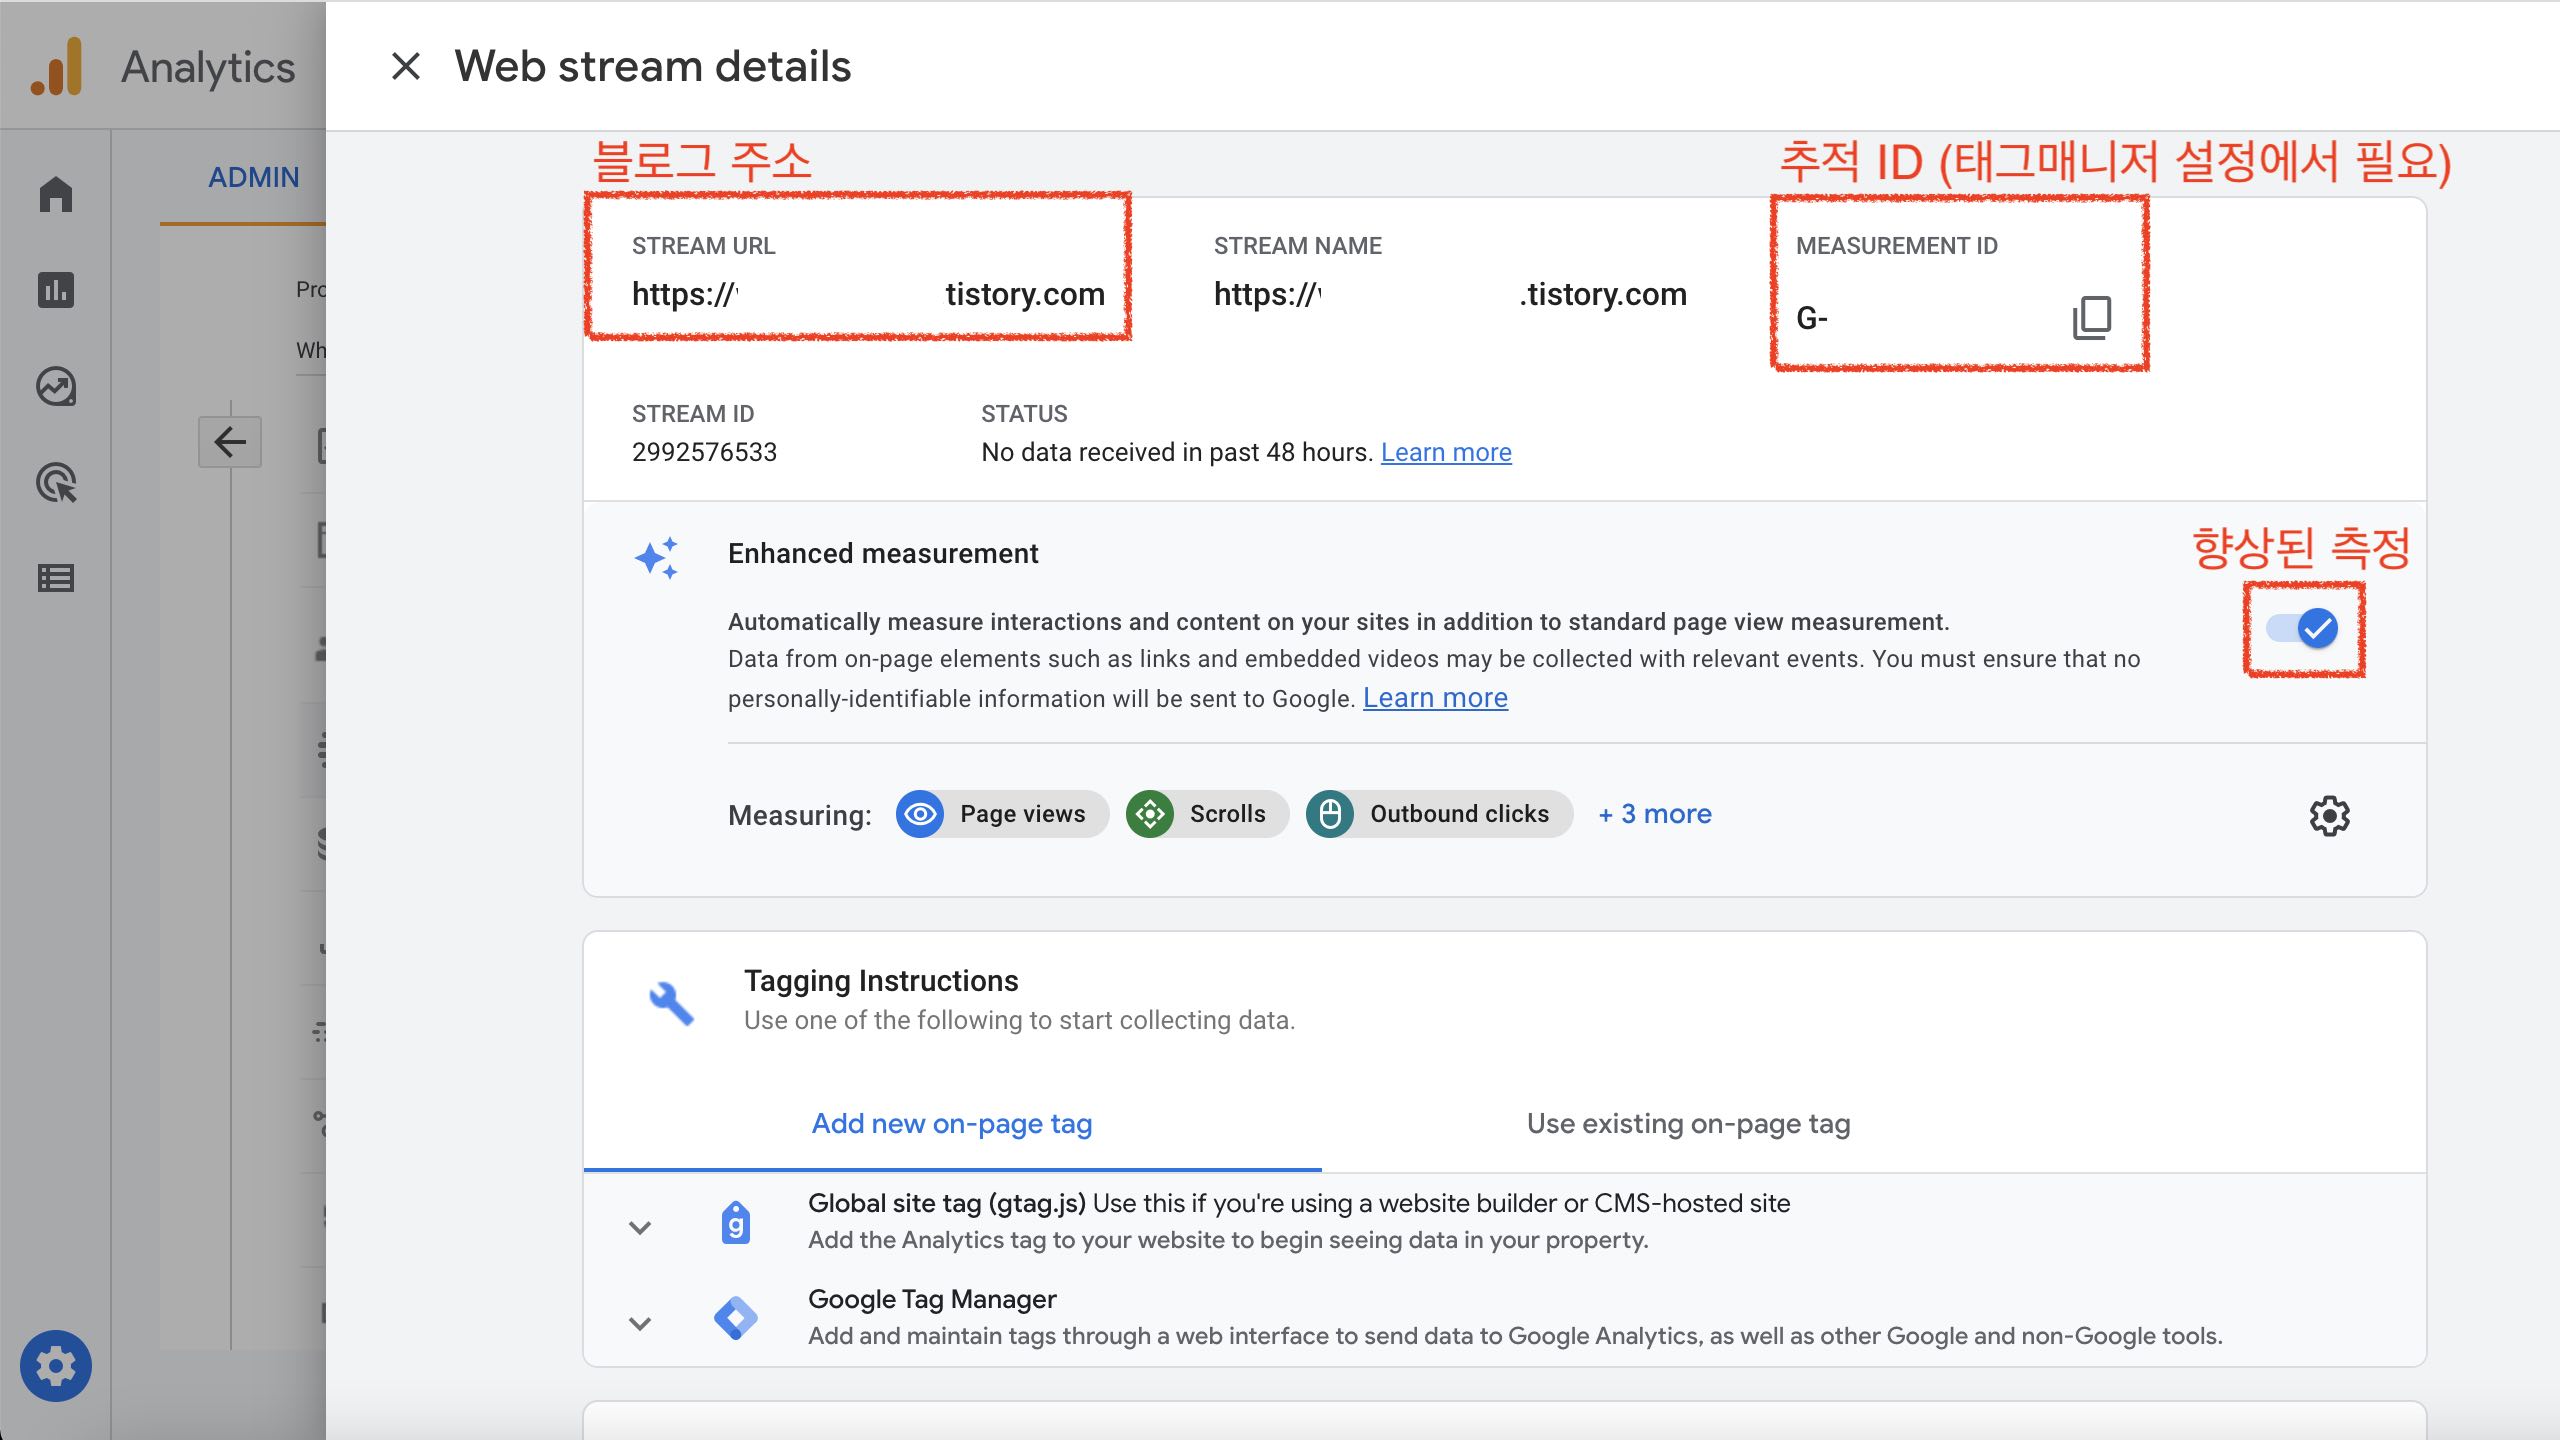 screenshot of Google Analytics 4&#44; showing Web stream details where one can get measurement ID and enable the Enhanced measurement.